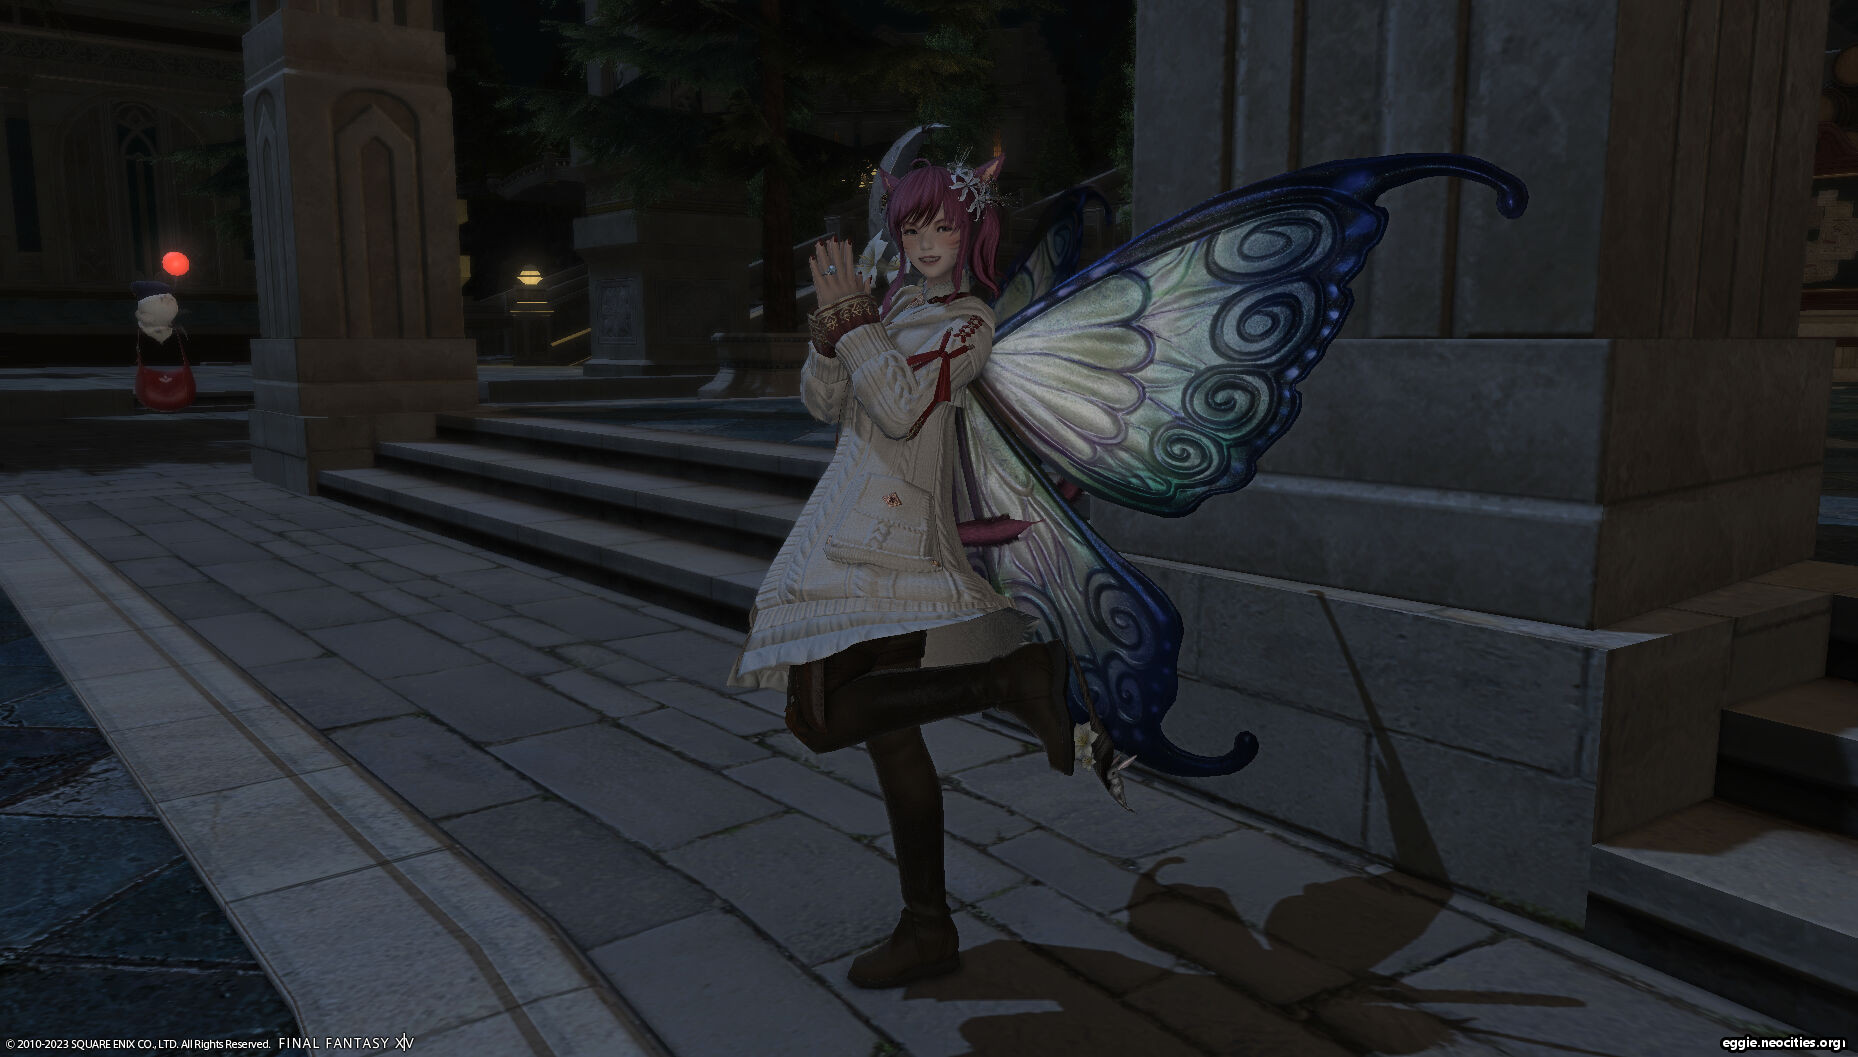 Zel with Statice Wings, a pair of silvery butterfly wings with blue and green at the borders. She is performing the Joy emote.